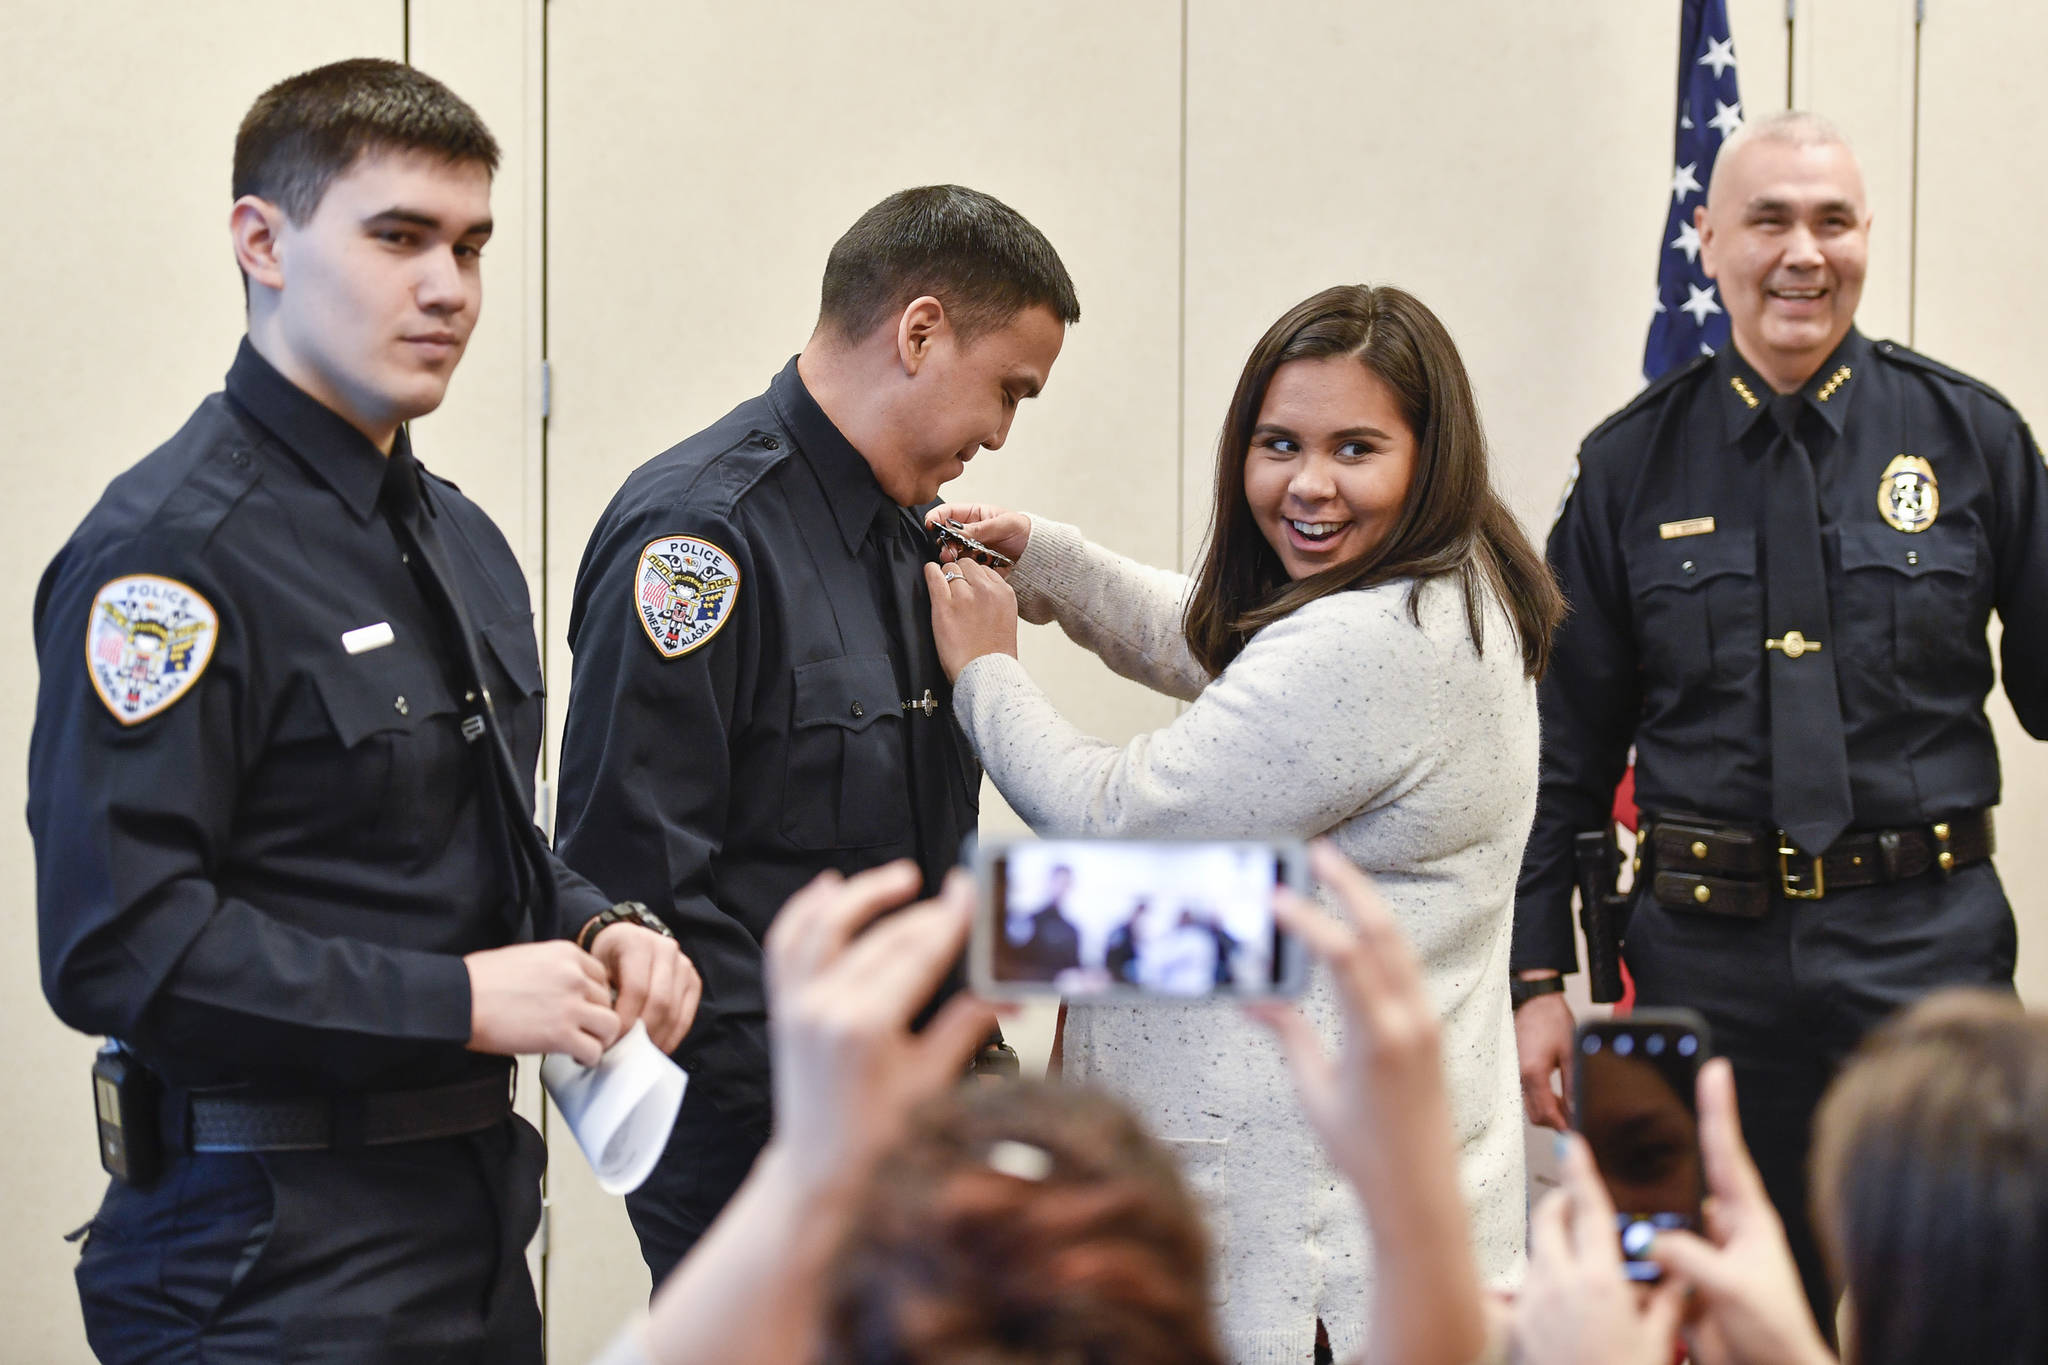 Amber White laughs as she pins a badge on her husband, Duain White, of Juneau, center, during a ceremony for new officers at the Juneau Police Department station on Thursday, Feb. 21, 2019. Chief of Police Ed Mercer, right, swore in White and Jonah Hennings-Booth, of Eagle River, left. (Michael Penn | Juneau Empire)